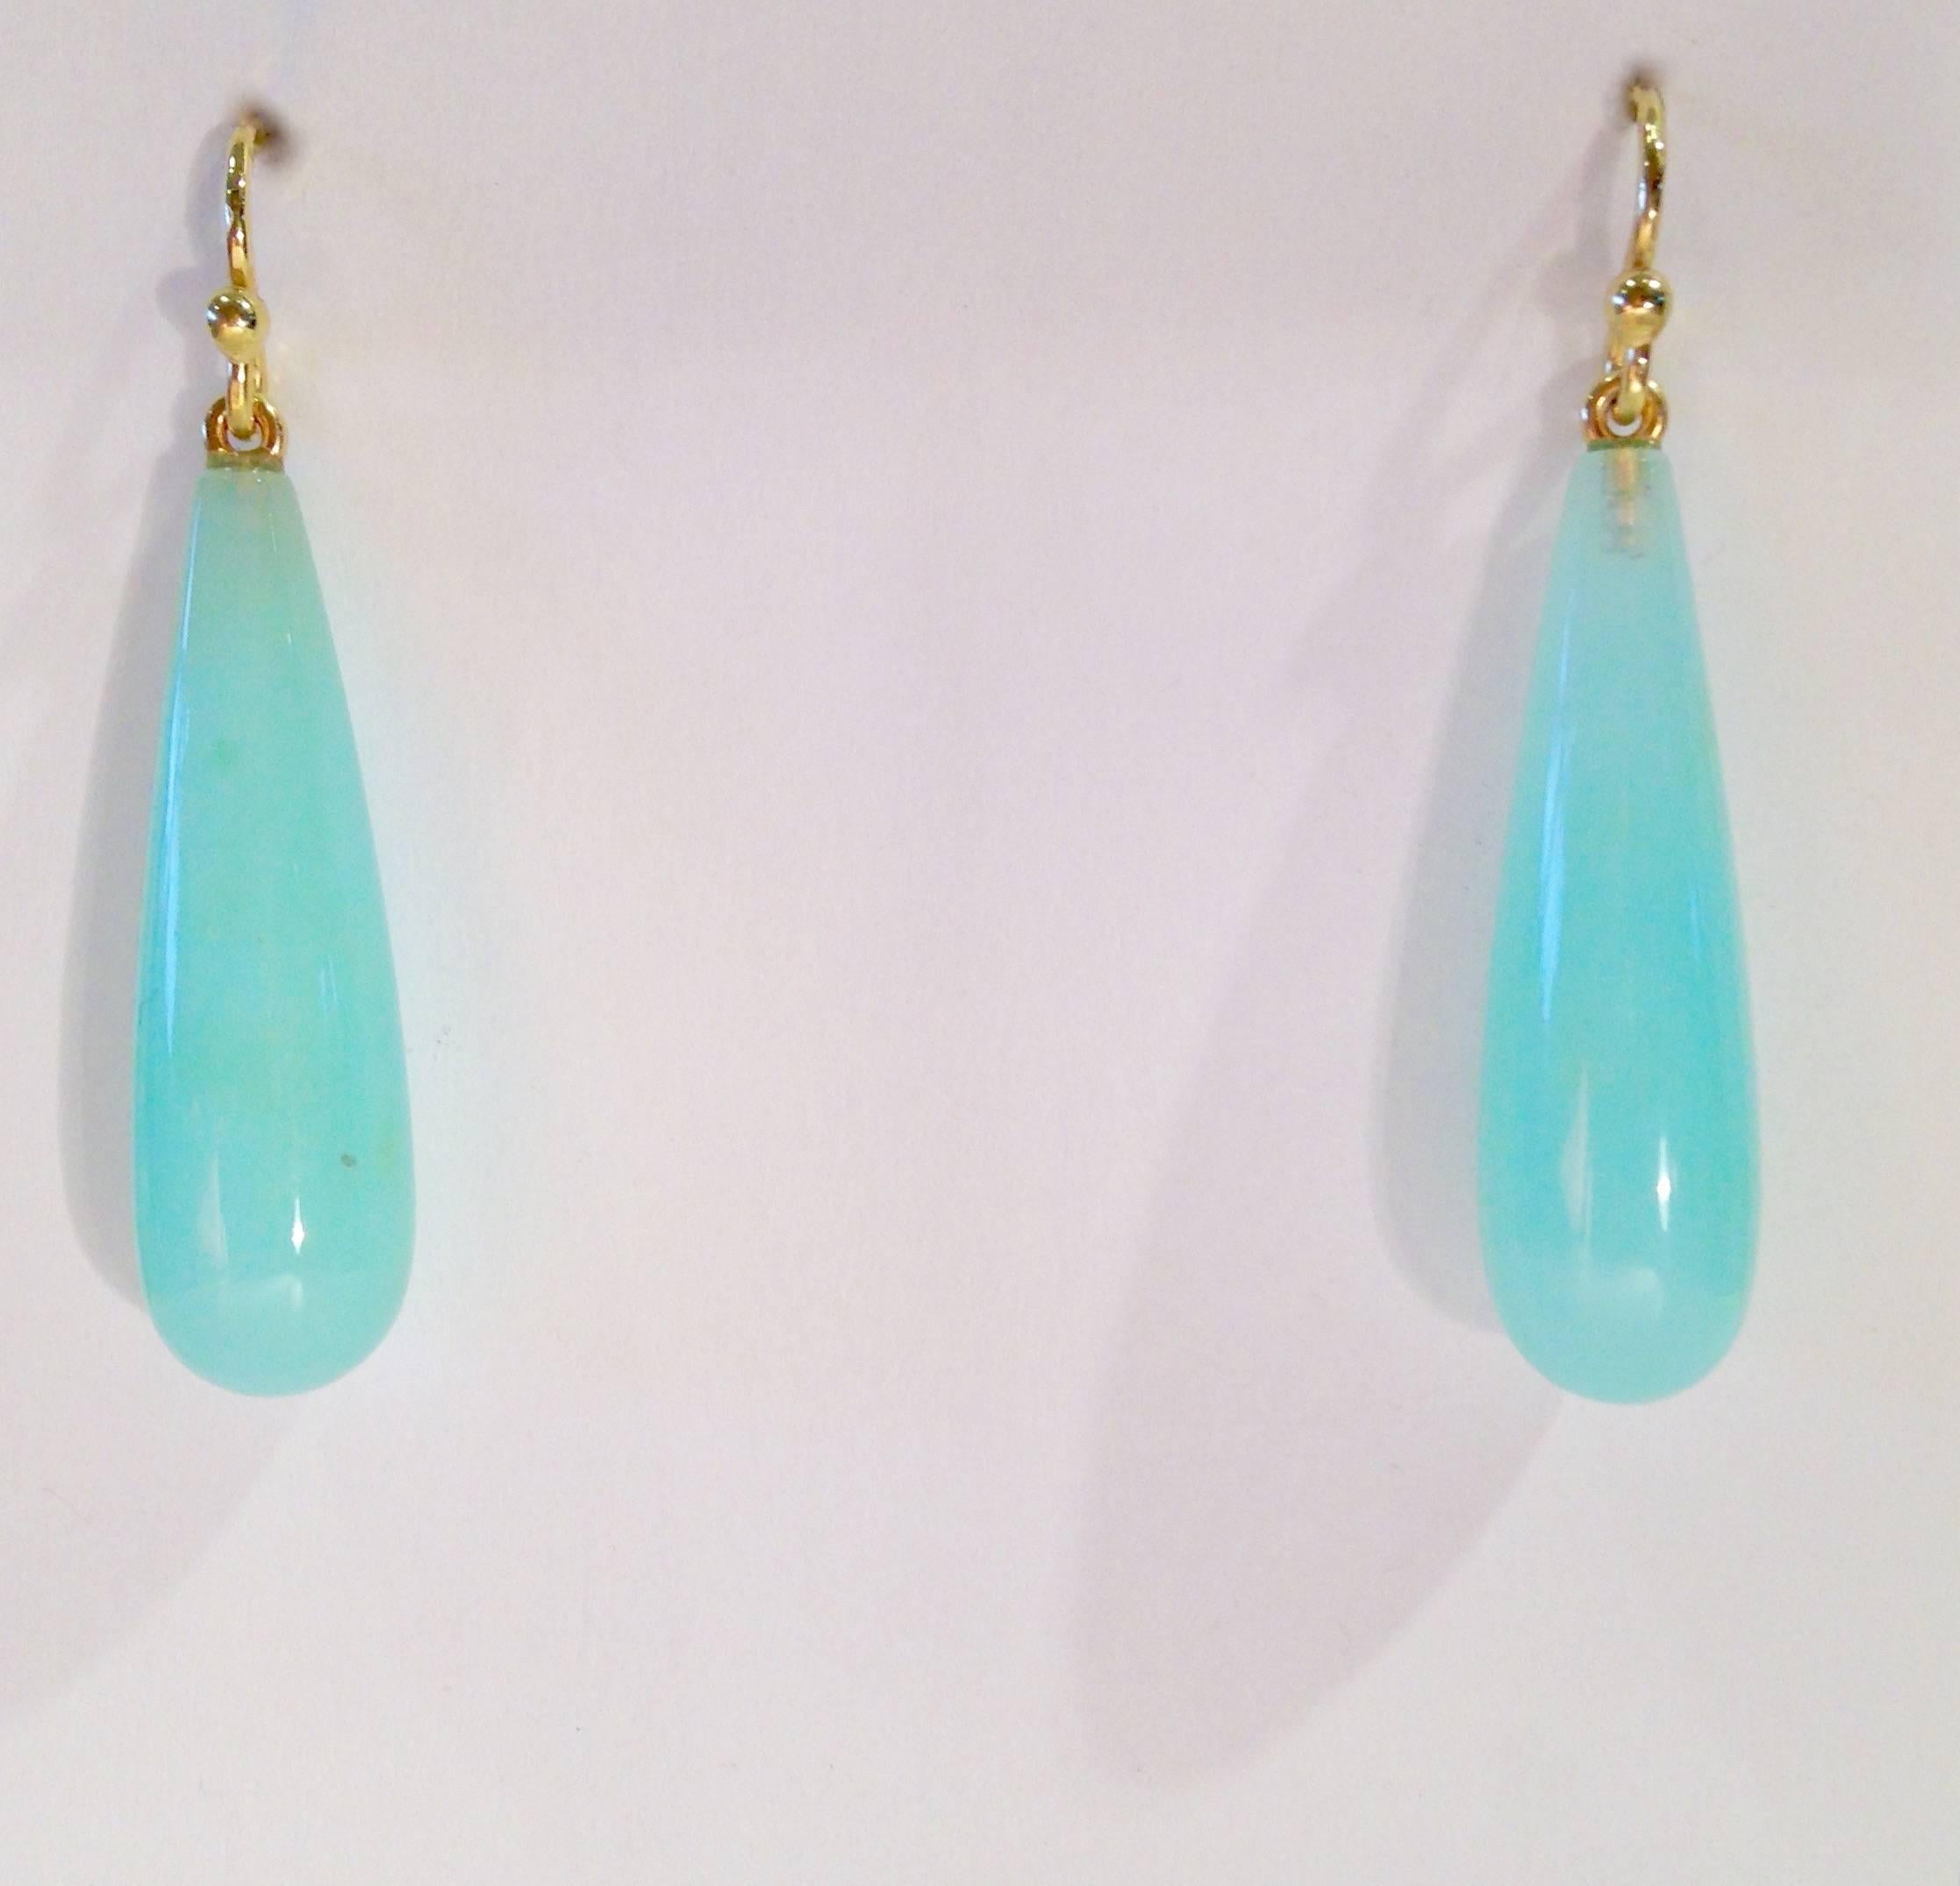 These earrings are made of tear drop shaped Blue Peruvian Opals set in 18k Gold wires.